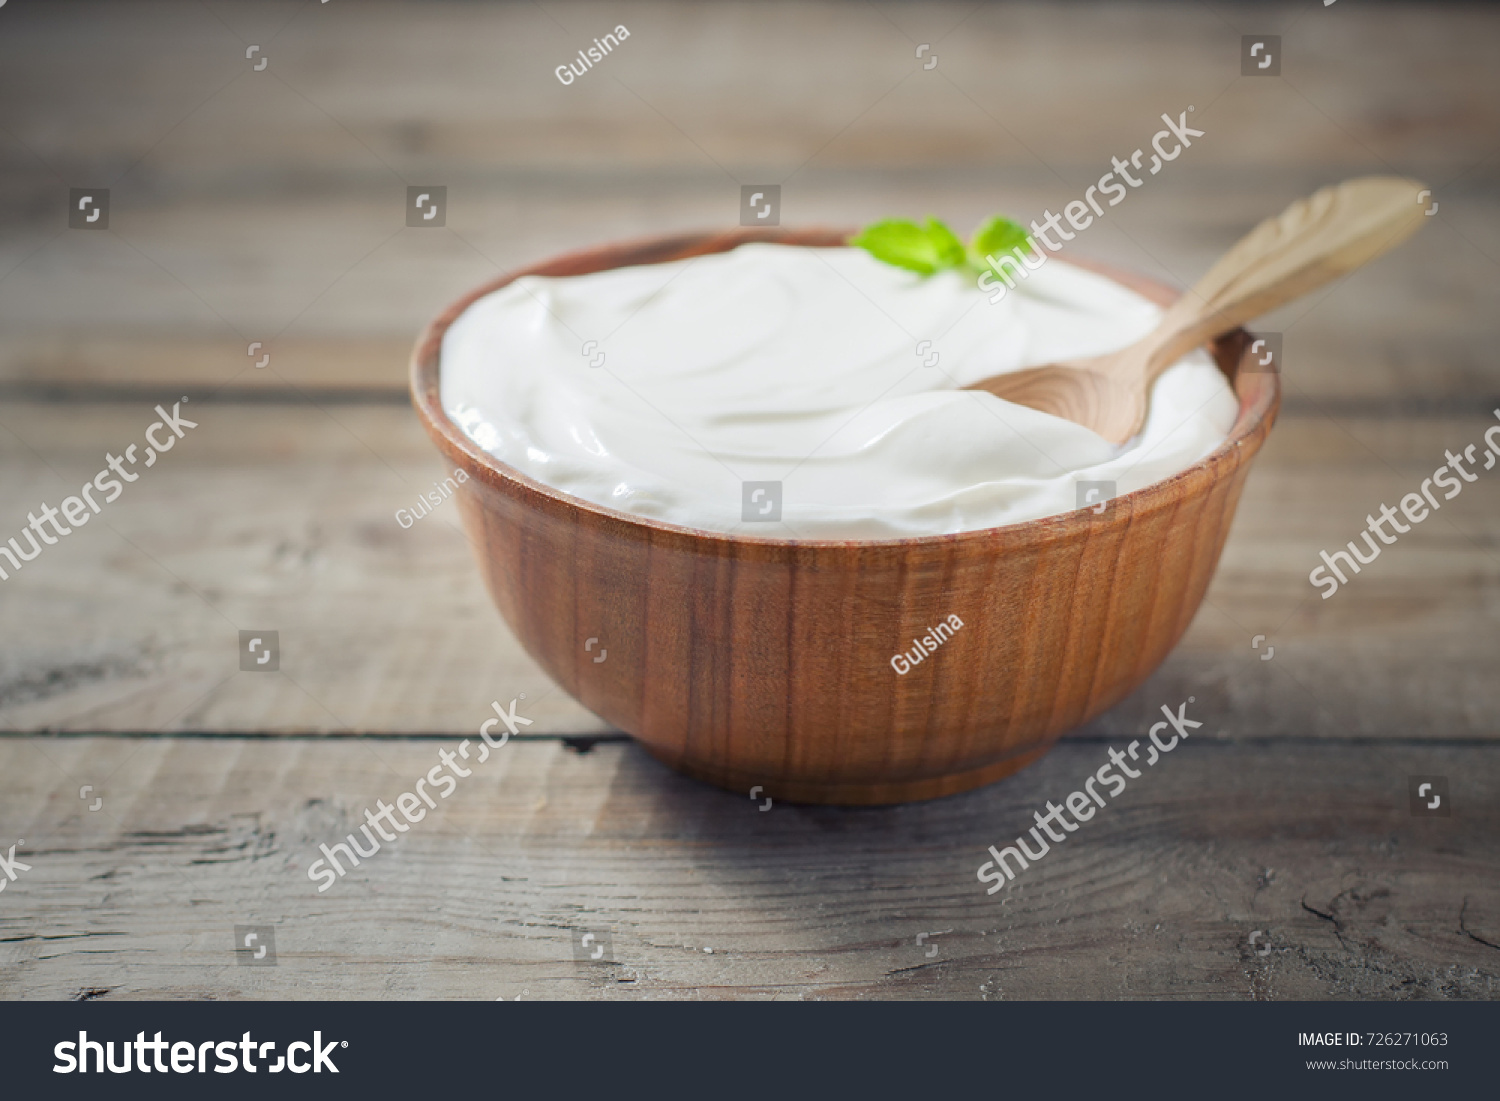 Greek yogurt in a wooden bowl on a rustic wooden table. Selective focus #726271063